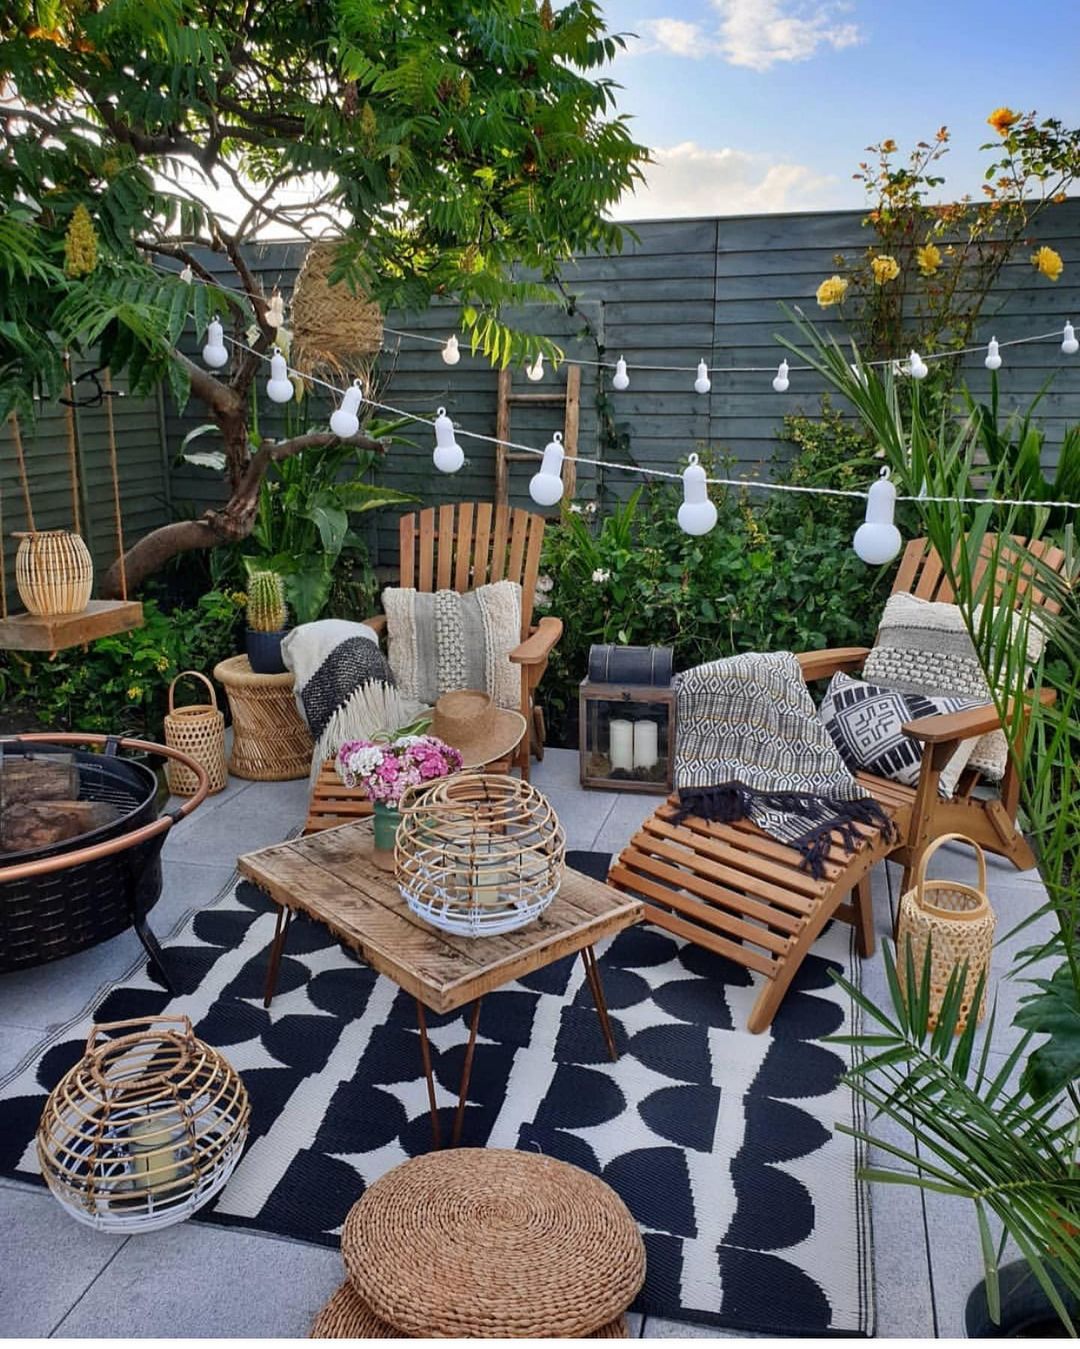 Chic Patterns in the Open Air - Outdoor Space Boho Style